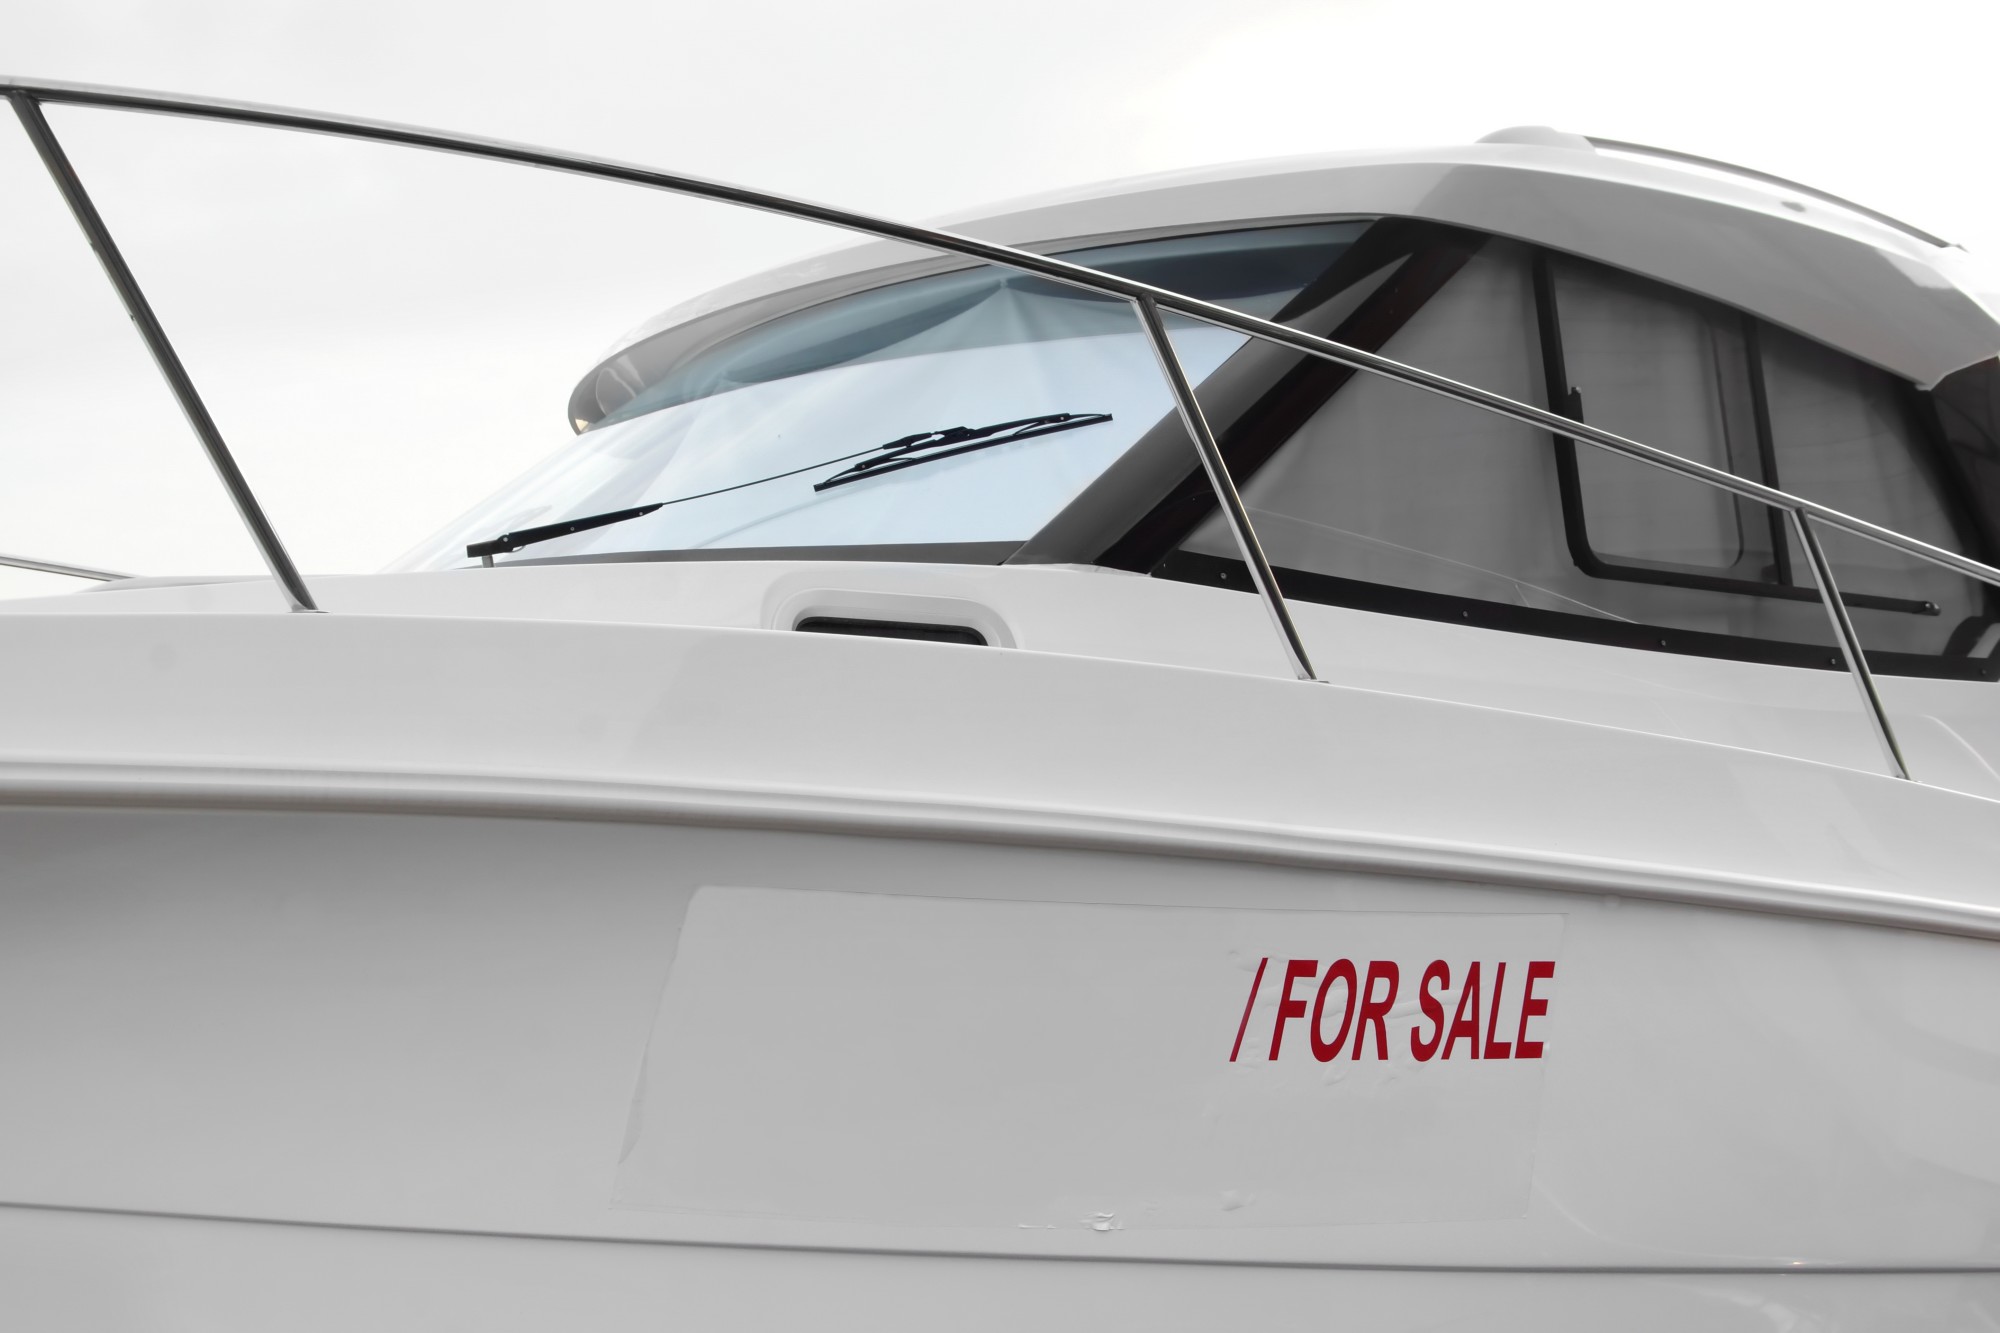 How to Buy a Used Boat From a Private Seller: Your Complete Guide